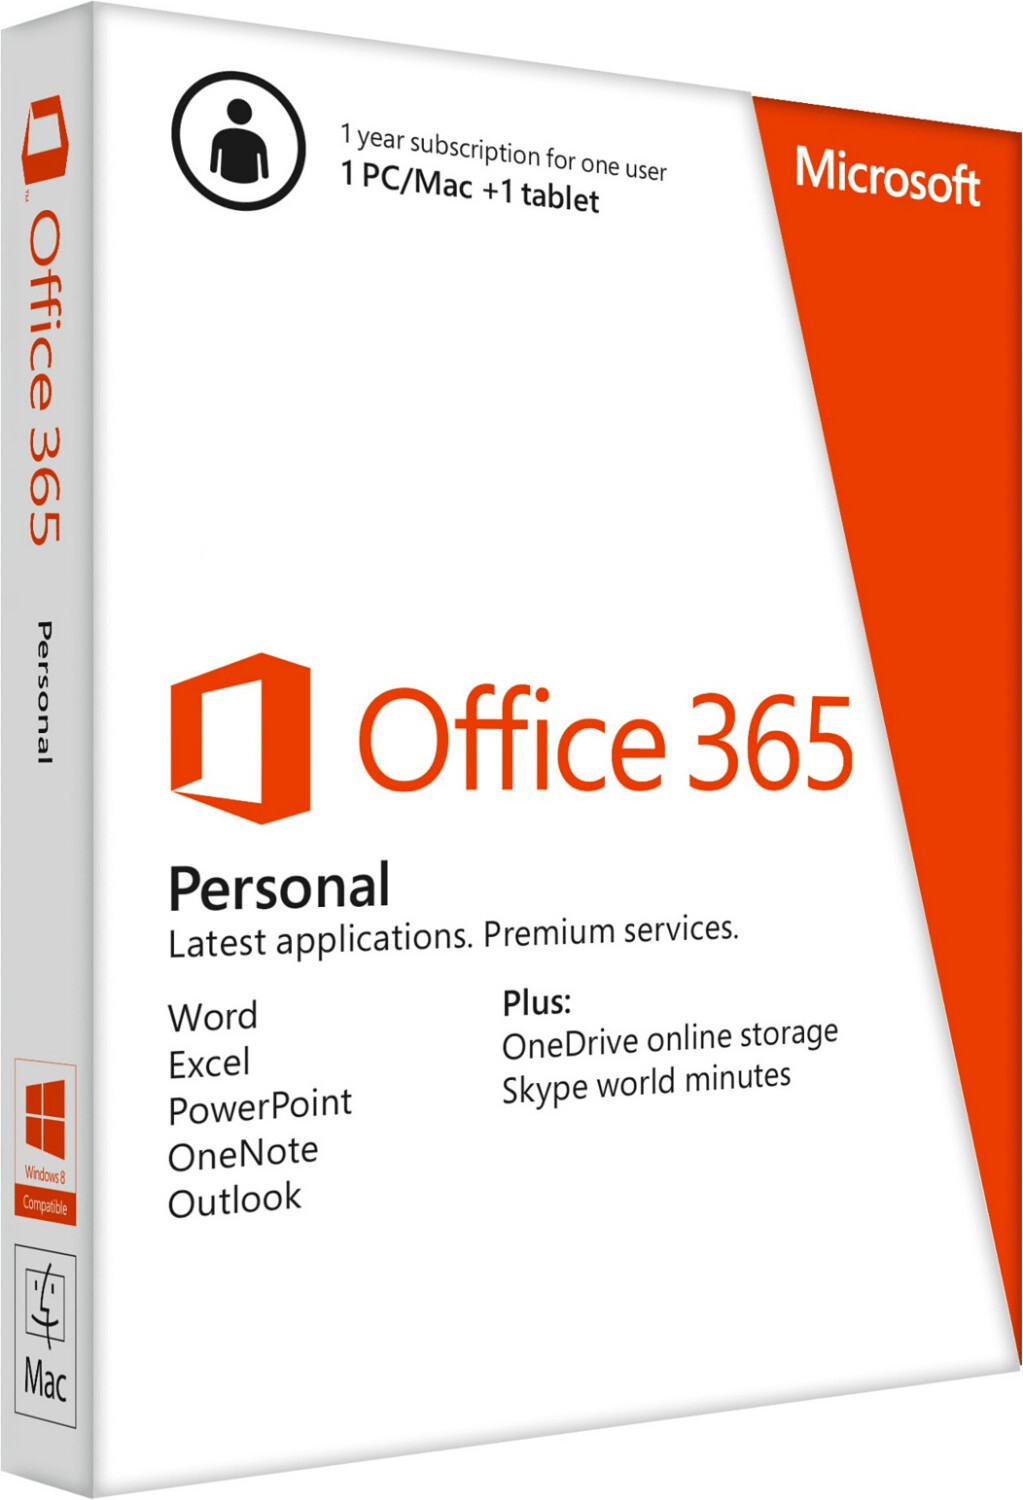 Buy Microsoft Office 365 Personal from £39.95 (Today) – Best Deals on